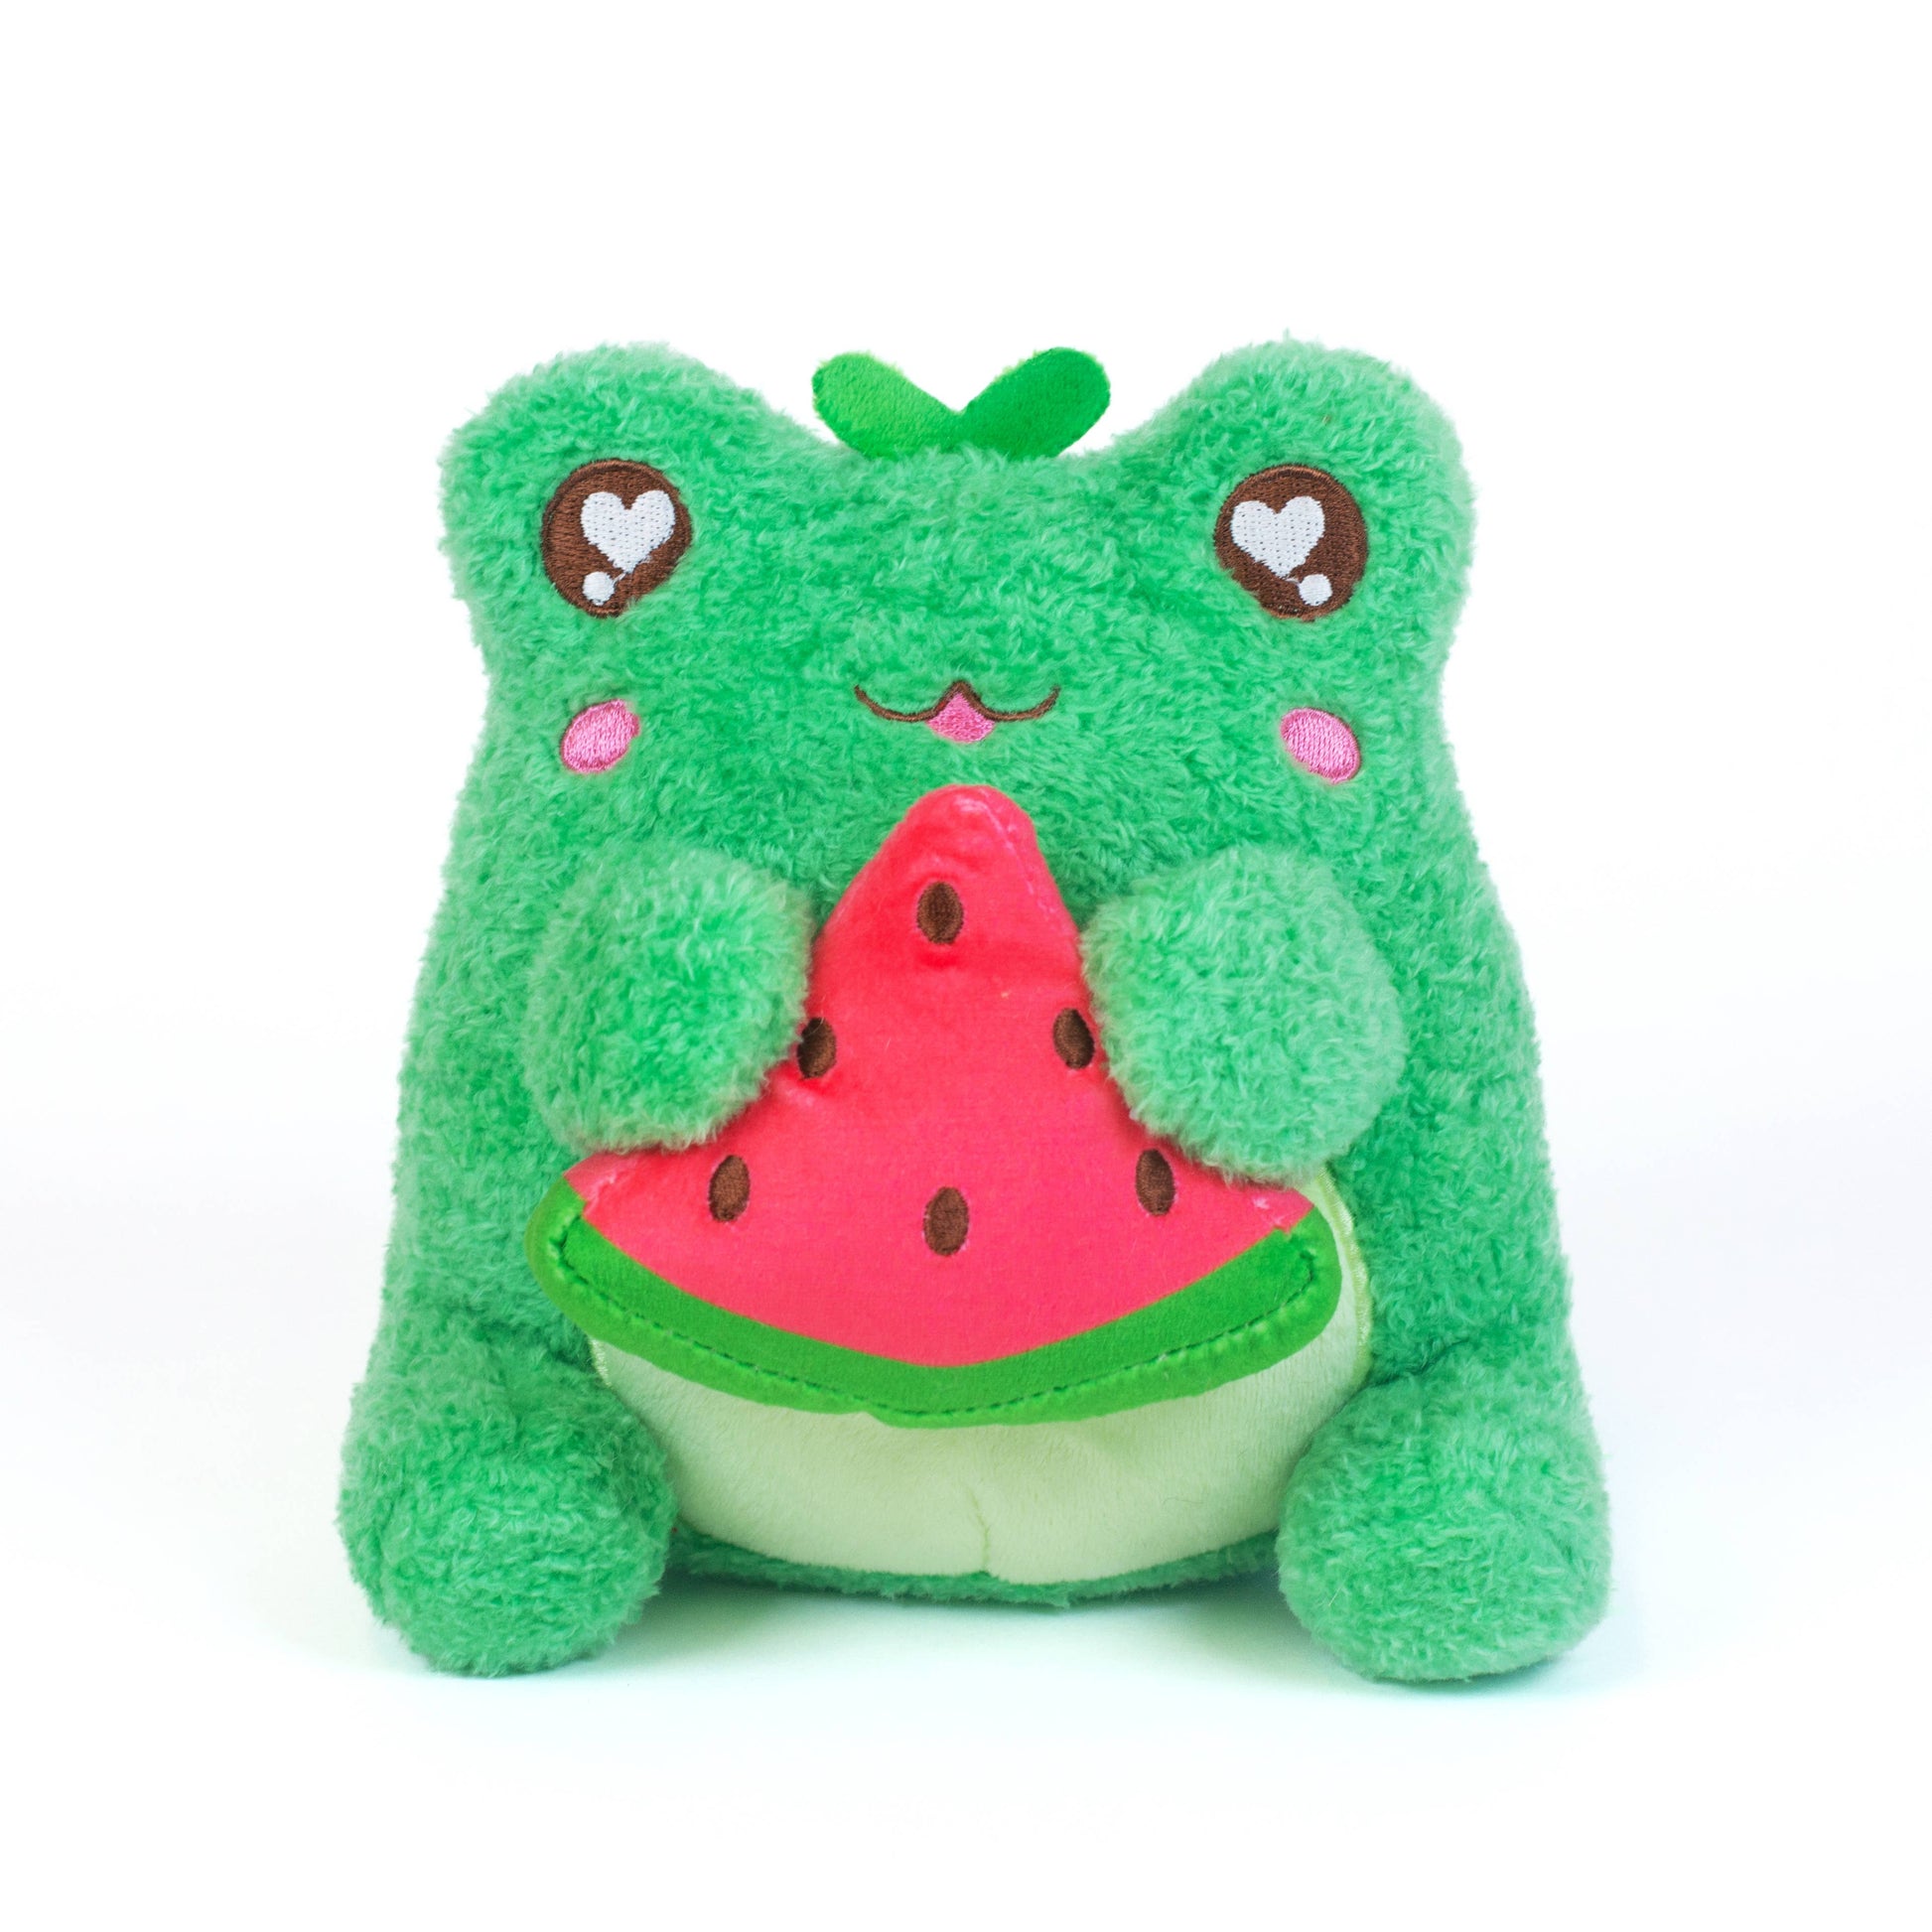 Coming Soon - Lil Series - Watermelon Munch Wawa (Watermelon-Scented) - Pink & Blue Kidz Clothing